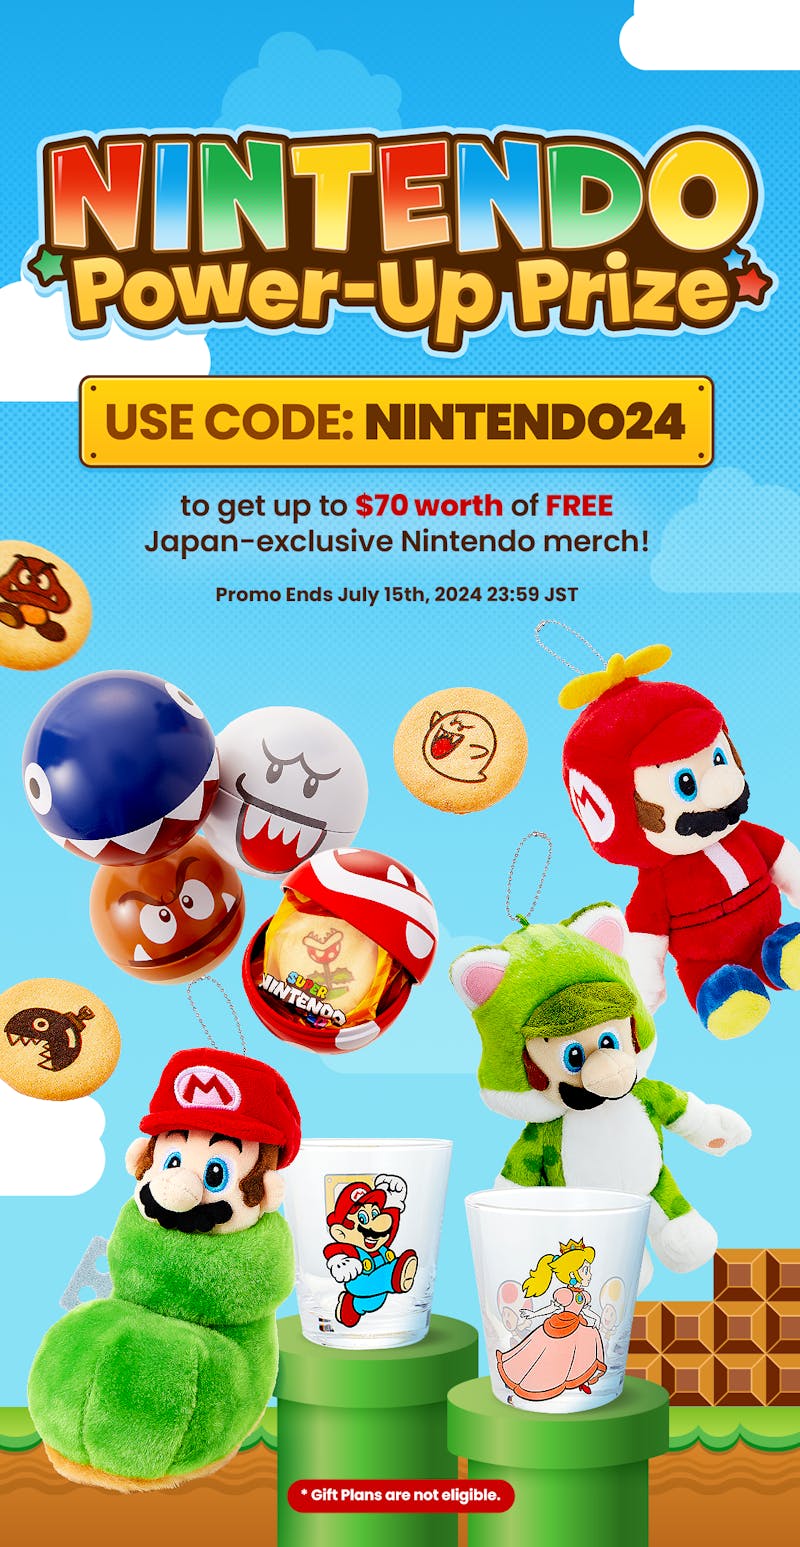 TokyoTreat's Nintendo Power-Up Prize promotion with featured Japan-exclusive items.